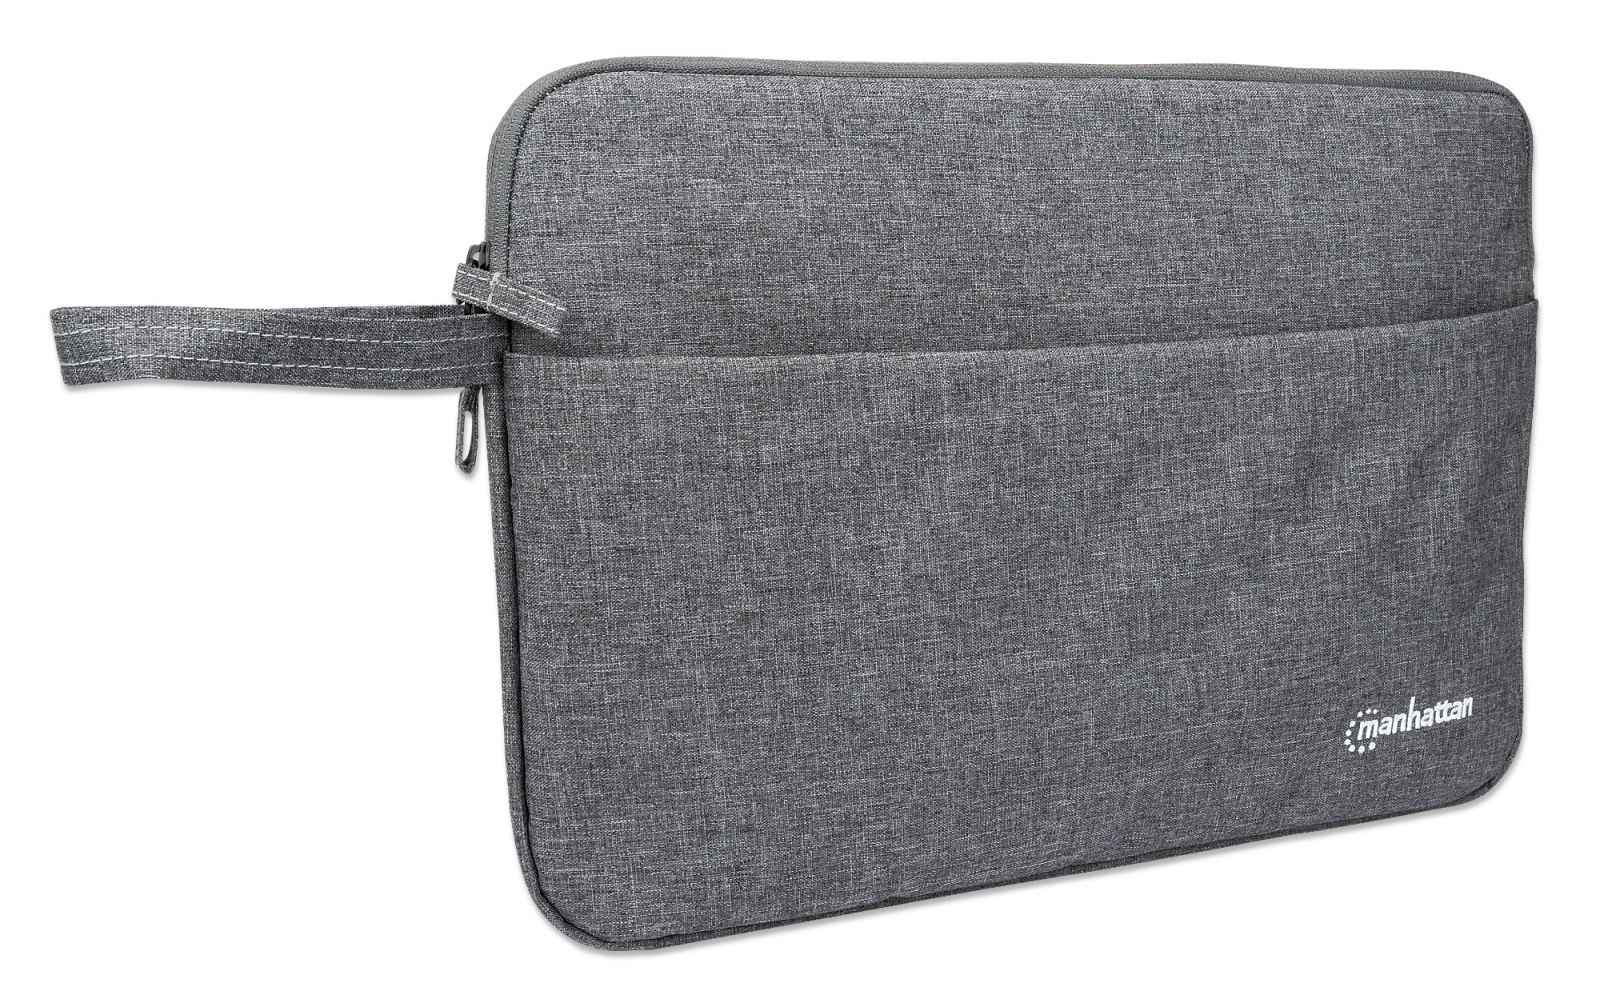 Manhattan Seattle Laptop Sleeve 14.5", Grey, Padded, Extra Soft Internal Cushioning, Main Compartment with double zips, Zippered Front Pocket, Carry Loop, Water Resistant and Durable